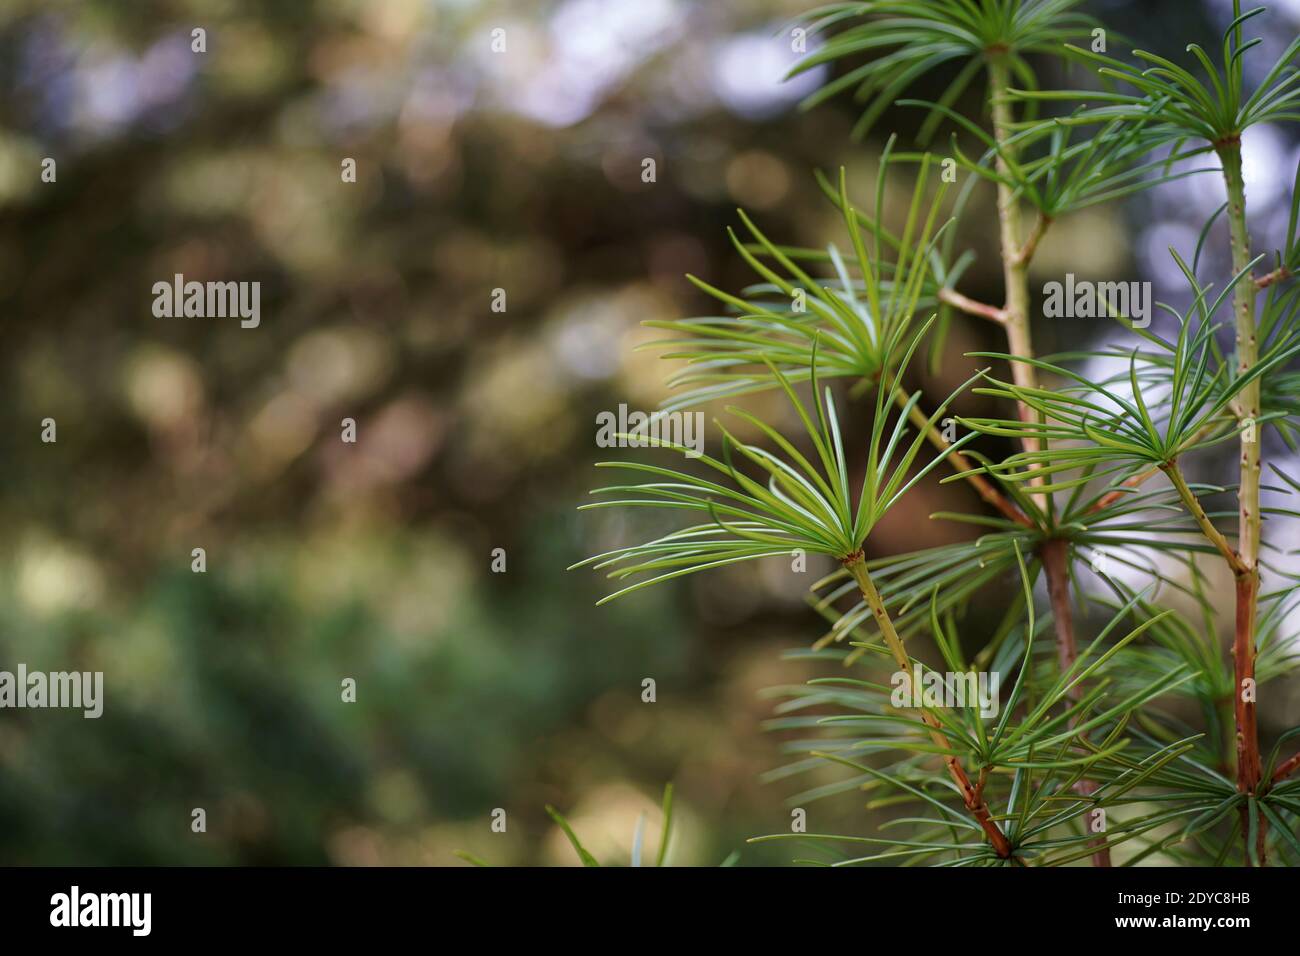 August in the garden, branches and needles of Japanese umbrella-pine tree, bokeh, fuzzy background and copy space Stock Photo